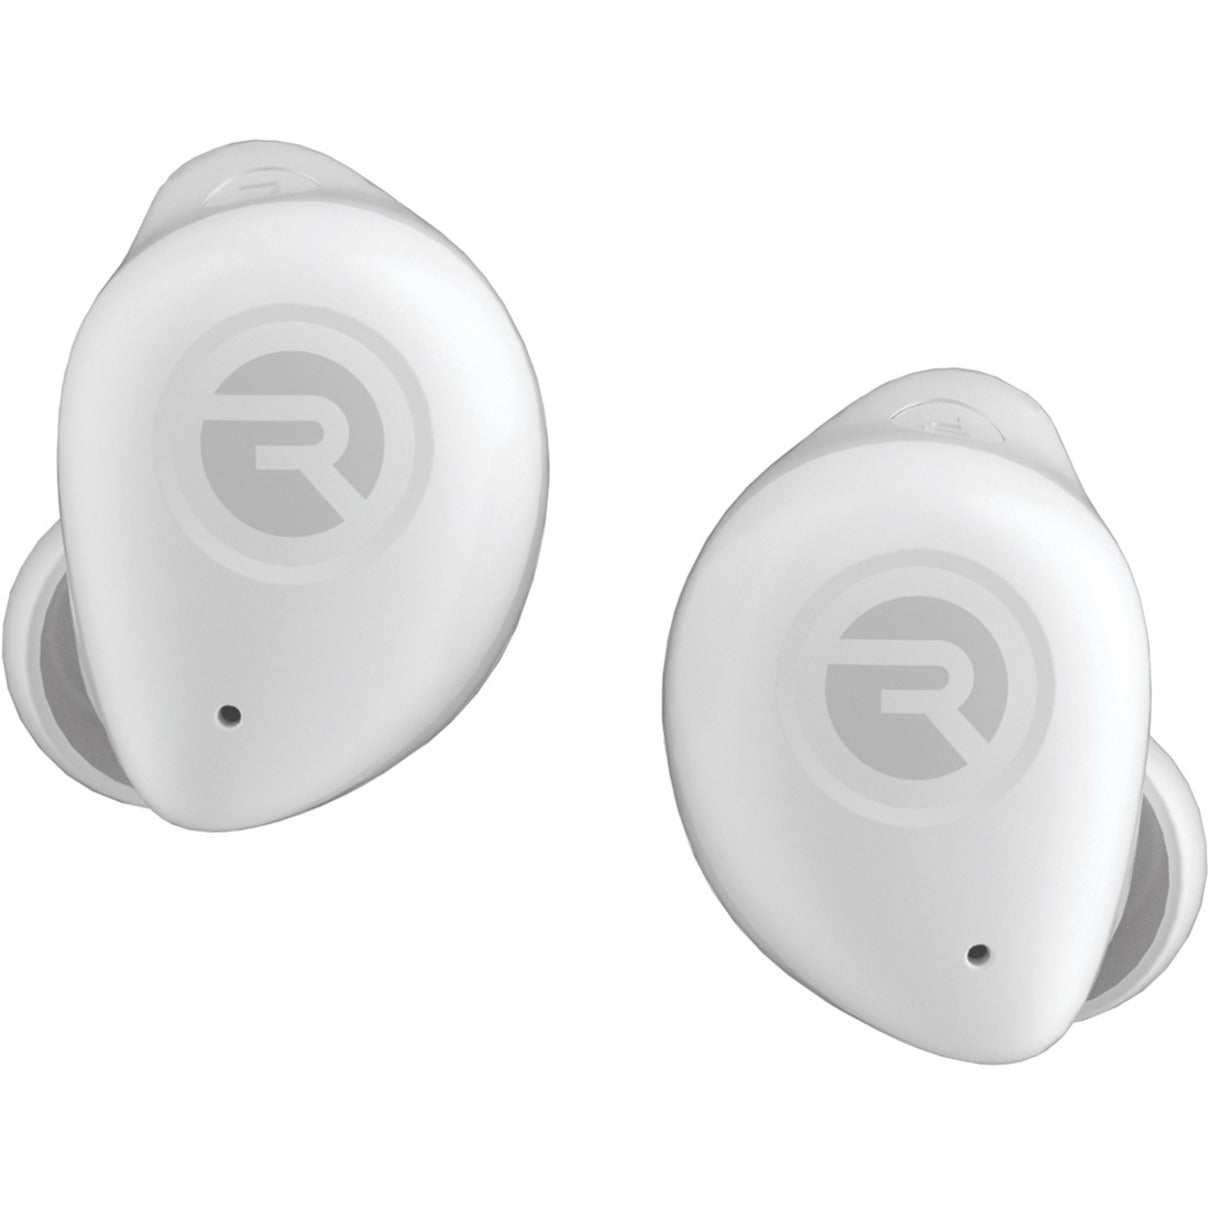 Raycon The Fitness Earbuds - Secure Fit, Lightweight, IPX7 [Discontinued]